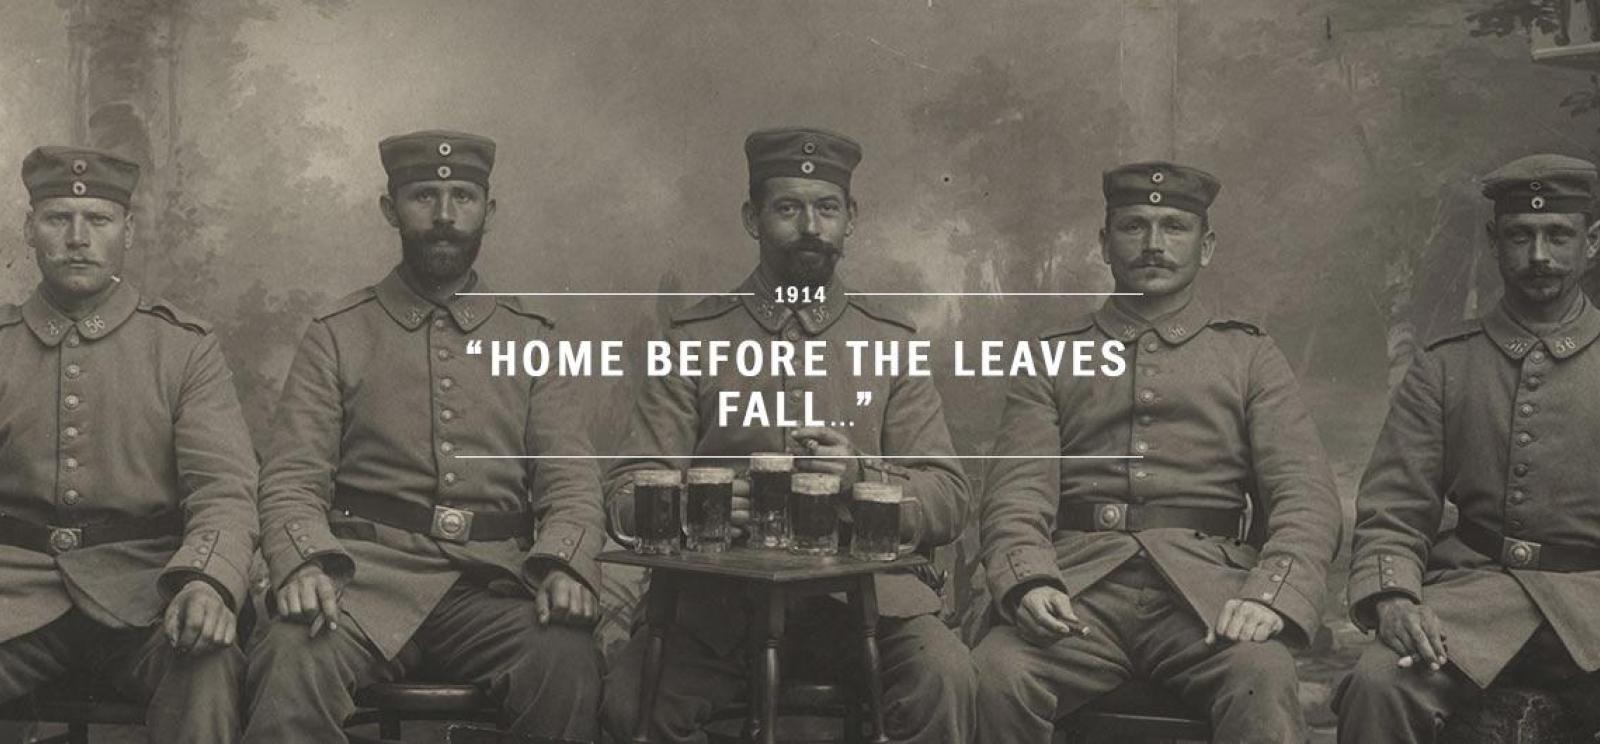 Image: Five men dressed in military uniform sitting for a photograph portrait facing the viewer. Text: Home Before the Leaves Fall.